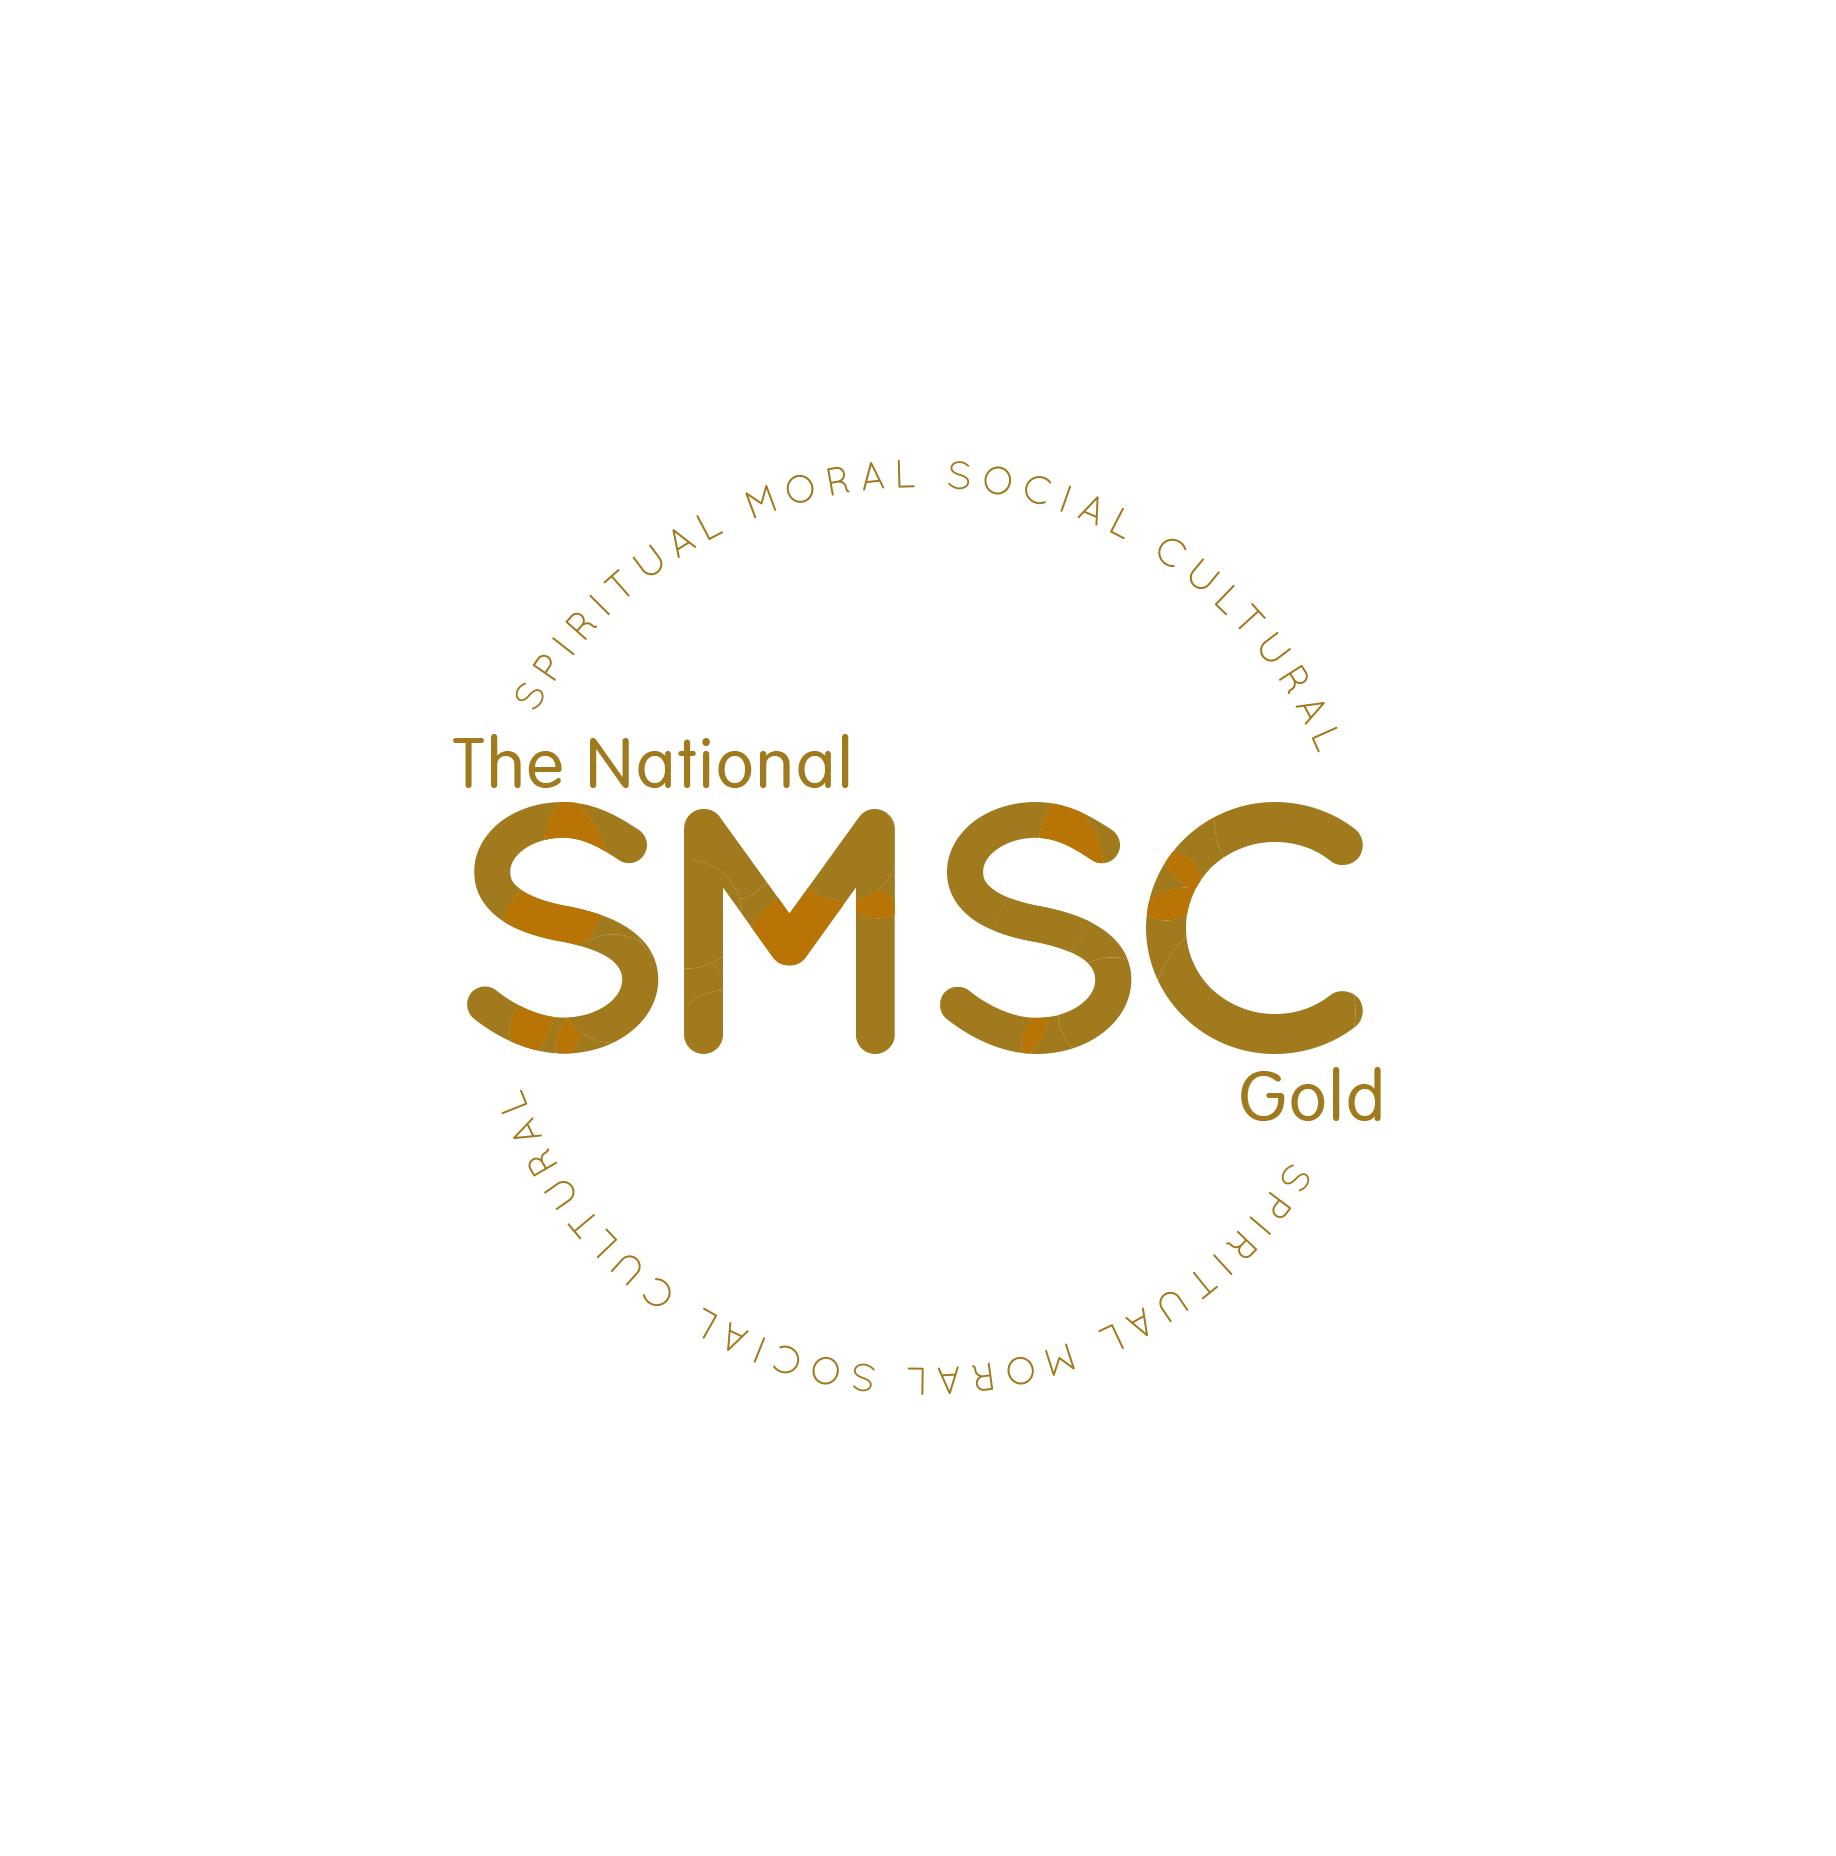 SMSC Gold Quality Mark